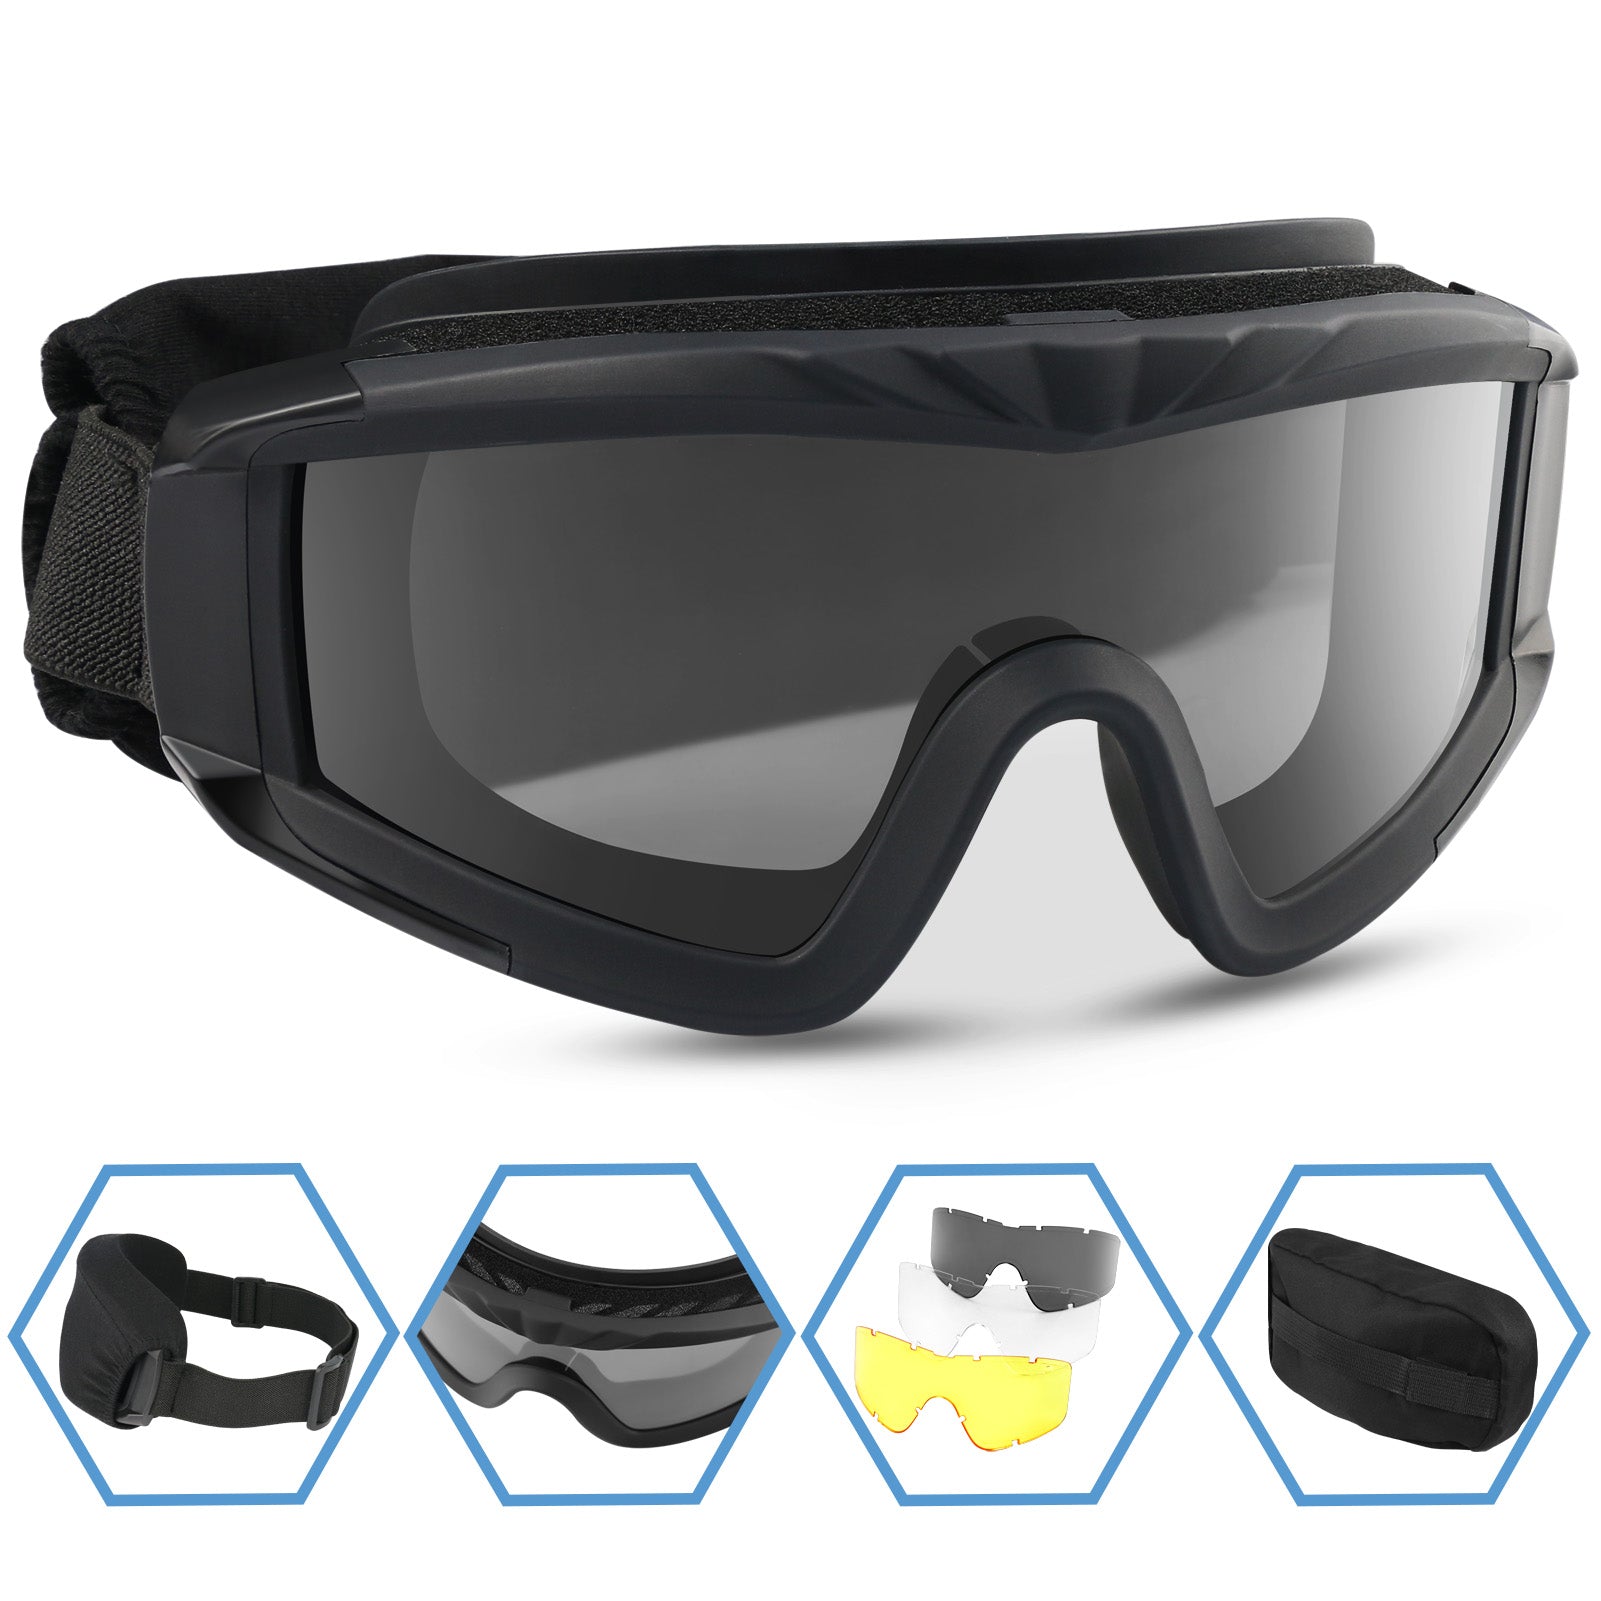 Airsoft Goggles Tactical Safety Goggles Anti Fog Glasses Hunting Cycling